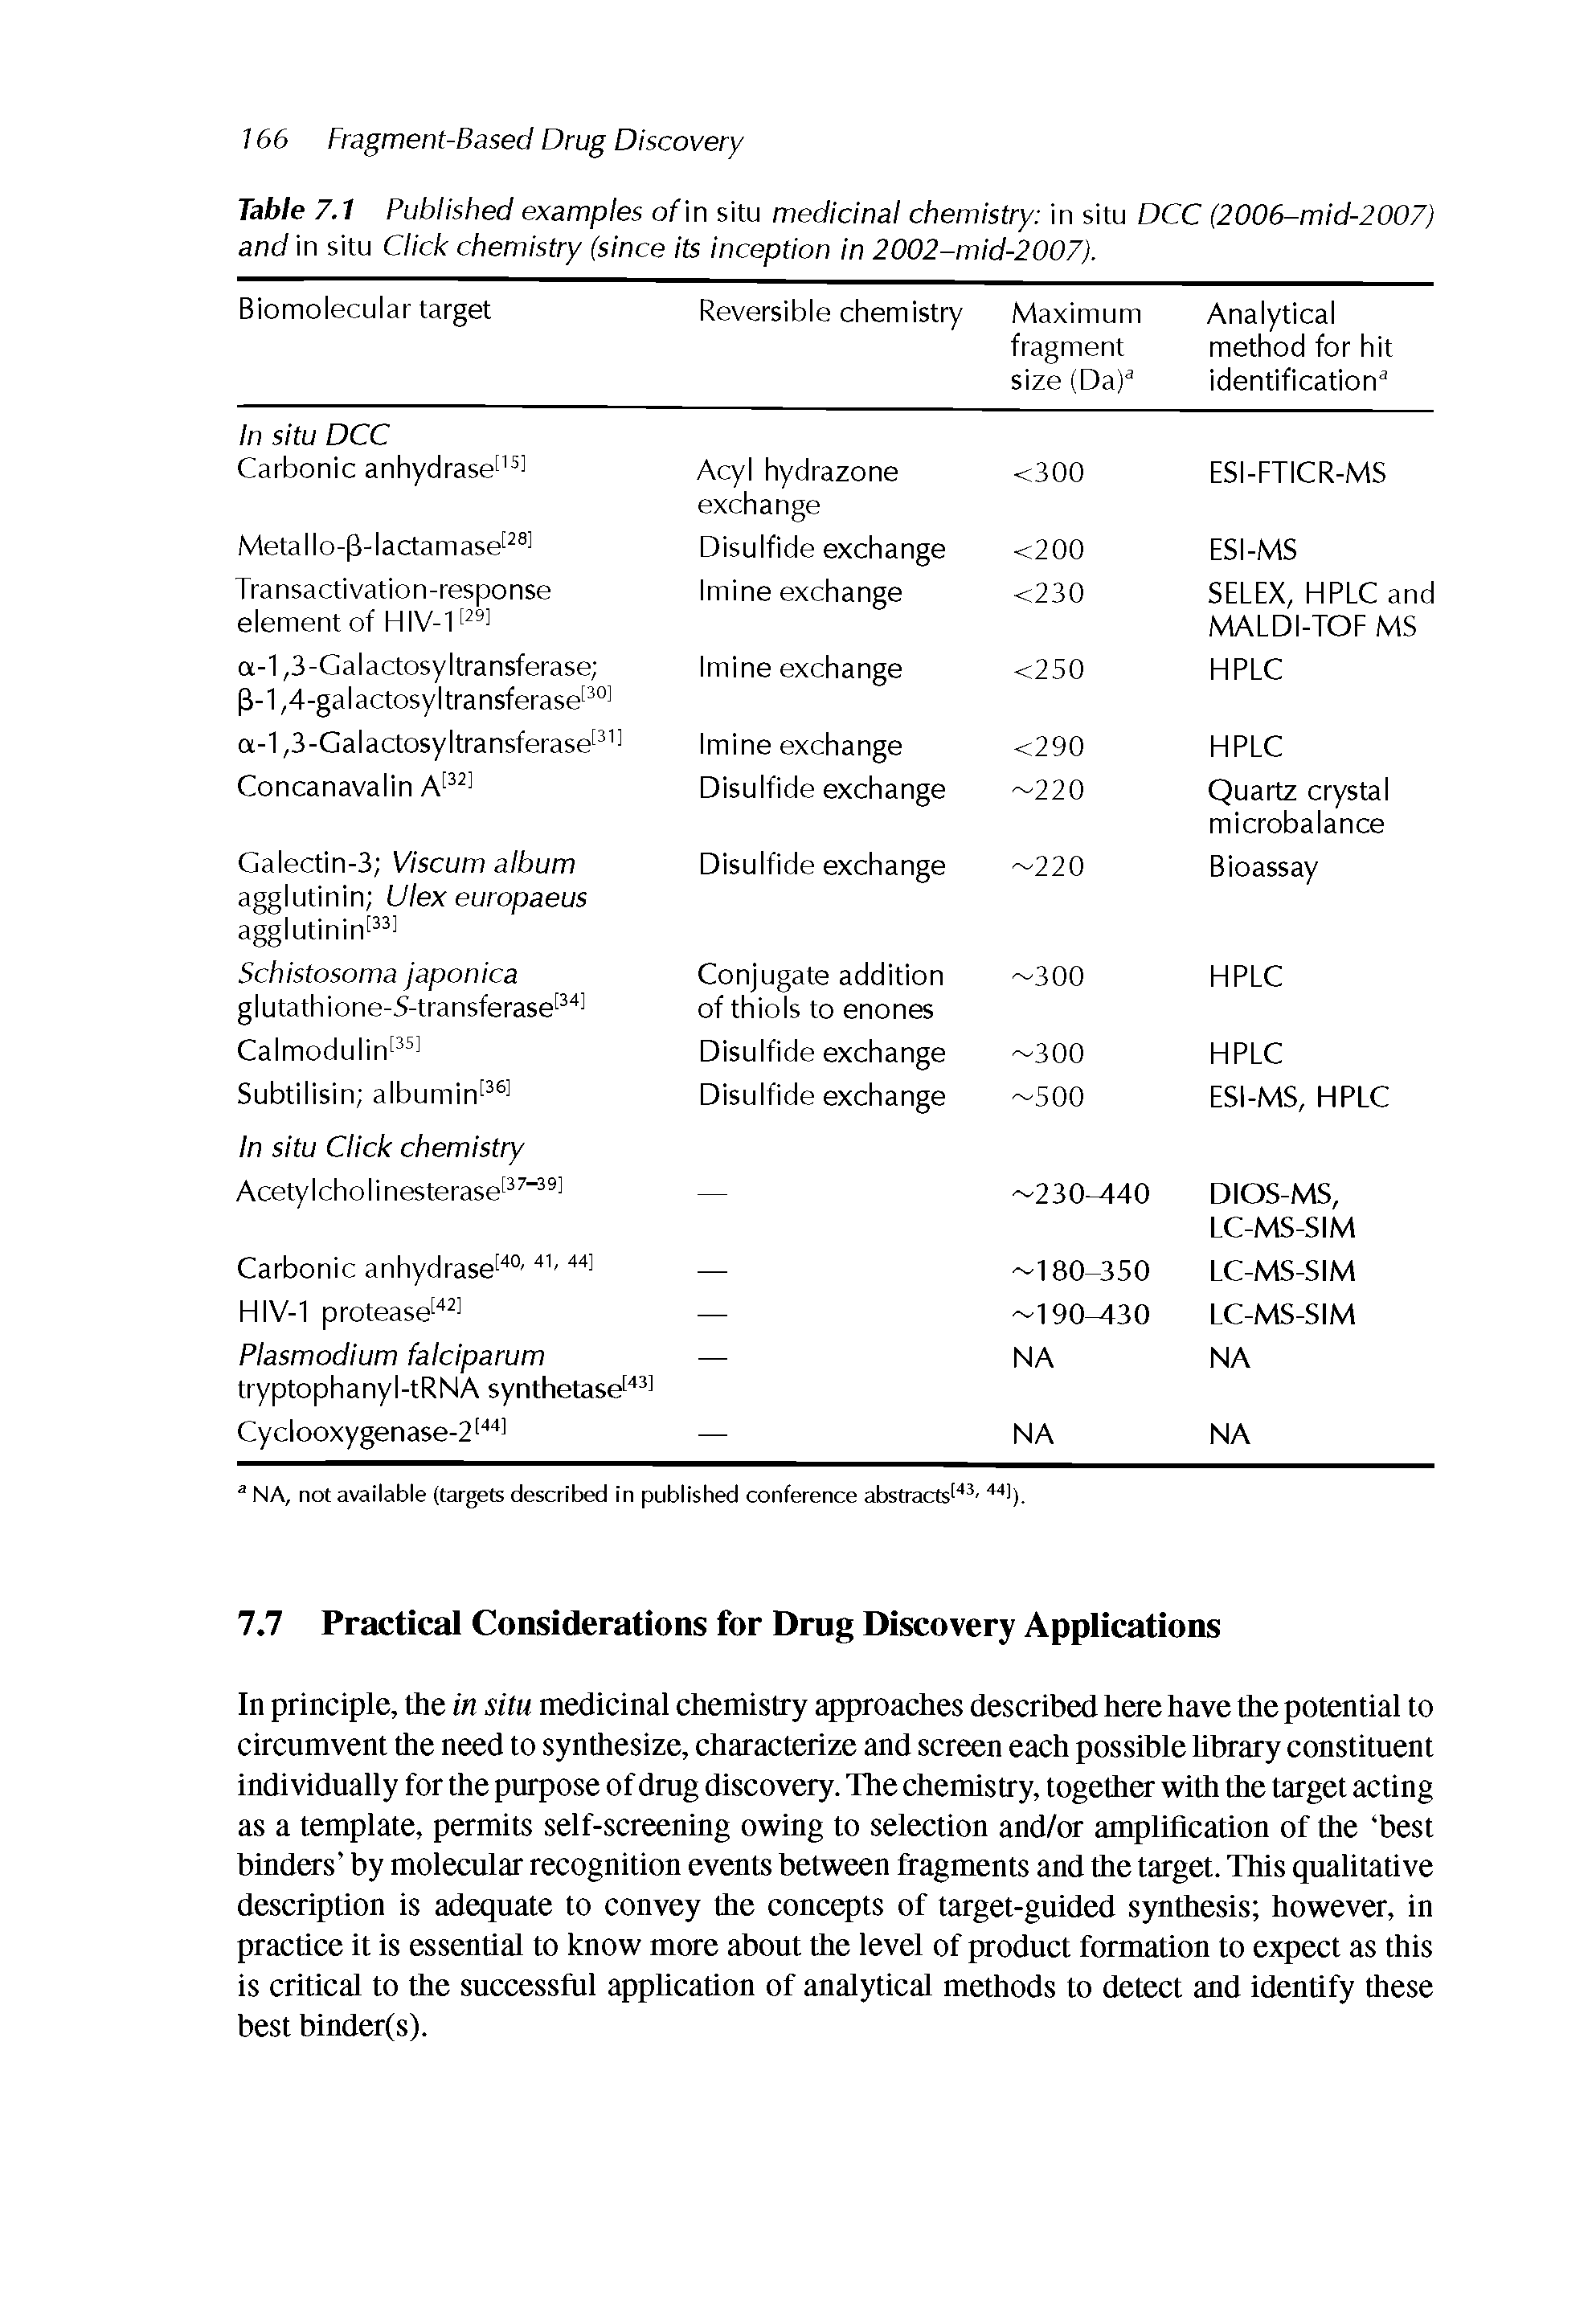 Table 7.1 Published examples of] n situ medicinal chemistry in situ DCC (2006-mid-2007) and in situ Click chemistry (since its inception in 2002-mid-2007).